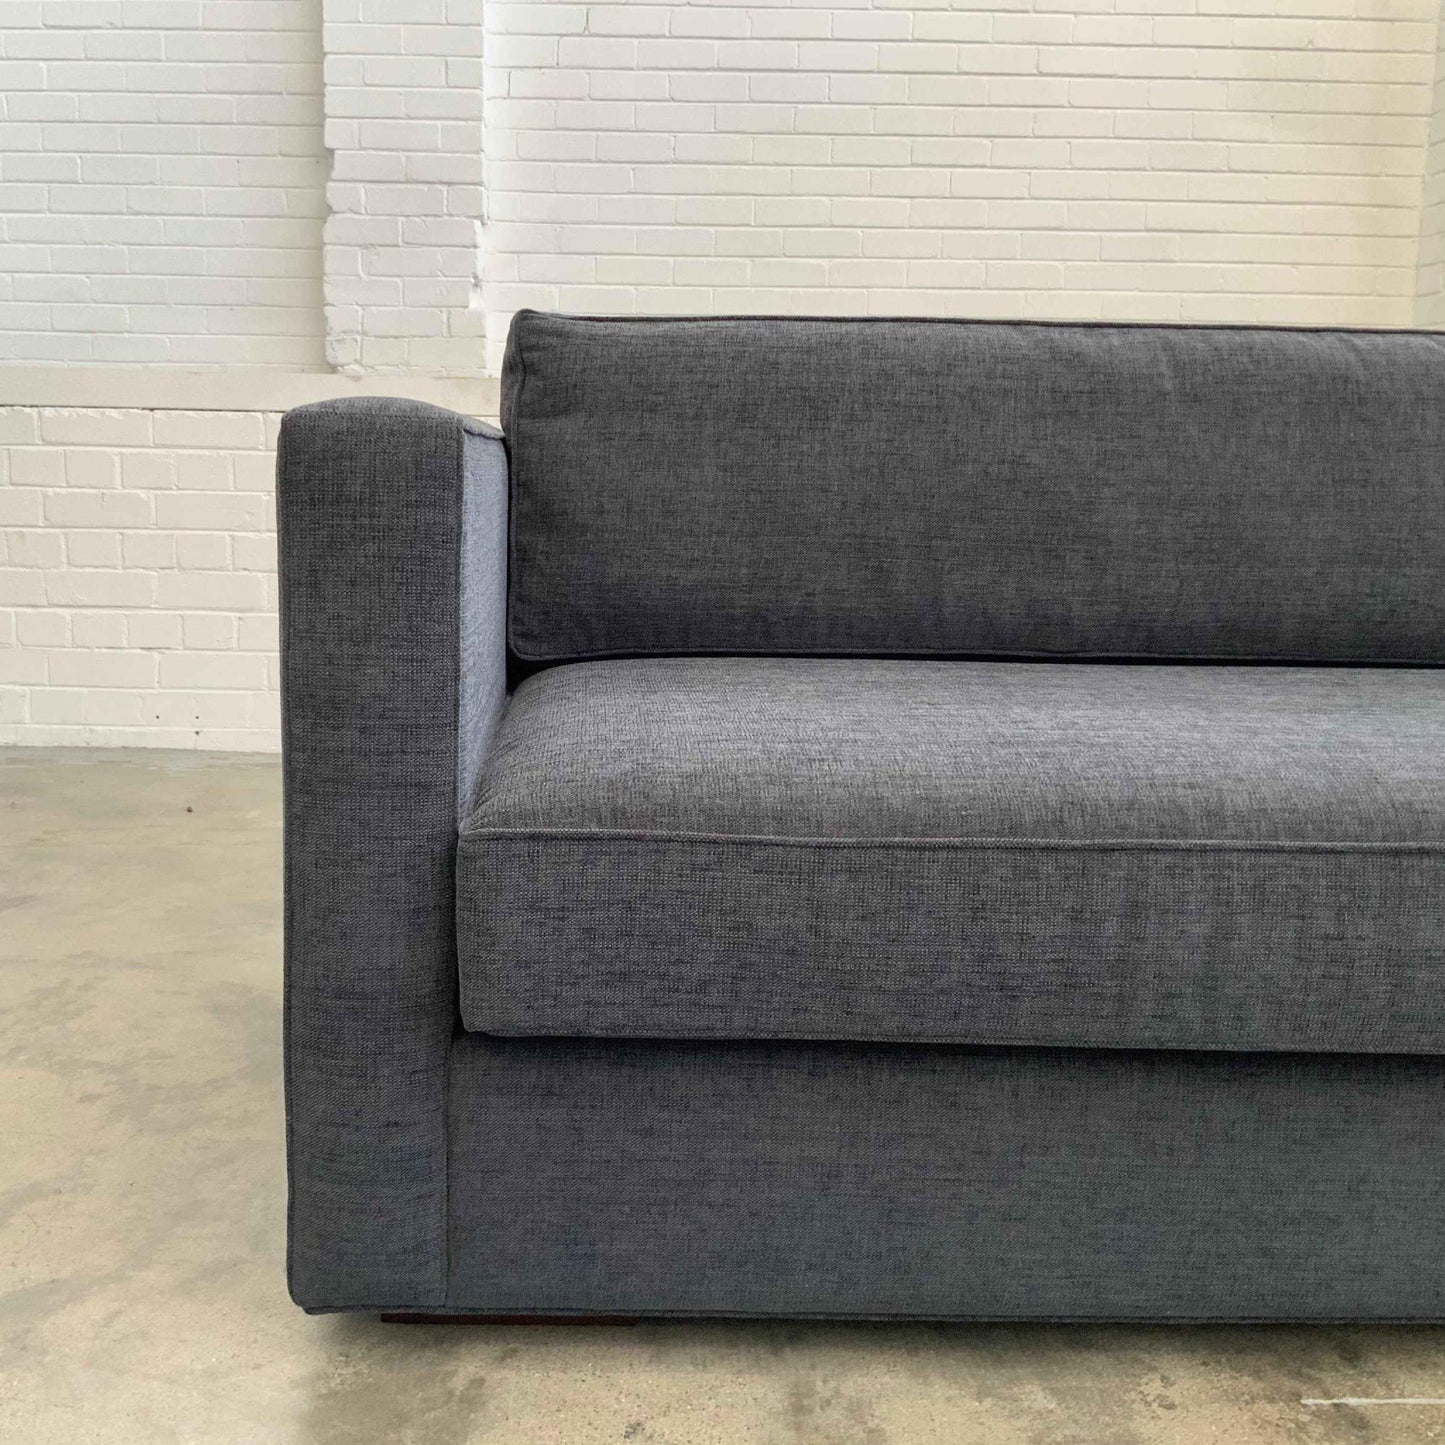 Newport Sofa | Value Range Fabrics Multiple Sizes And Options Available Made To Order In Wa